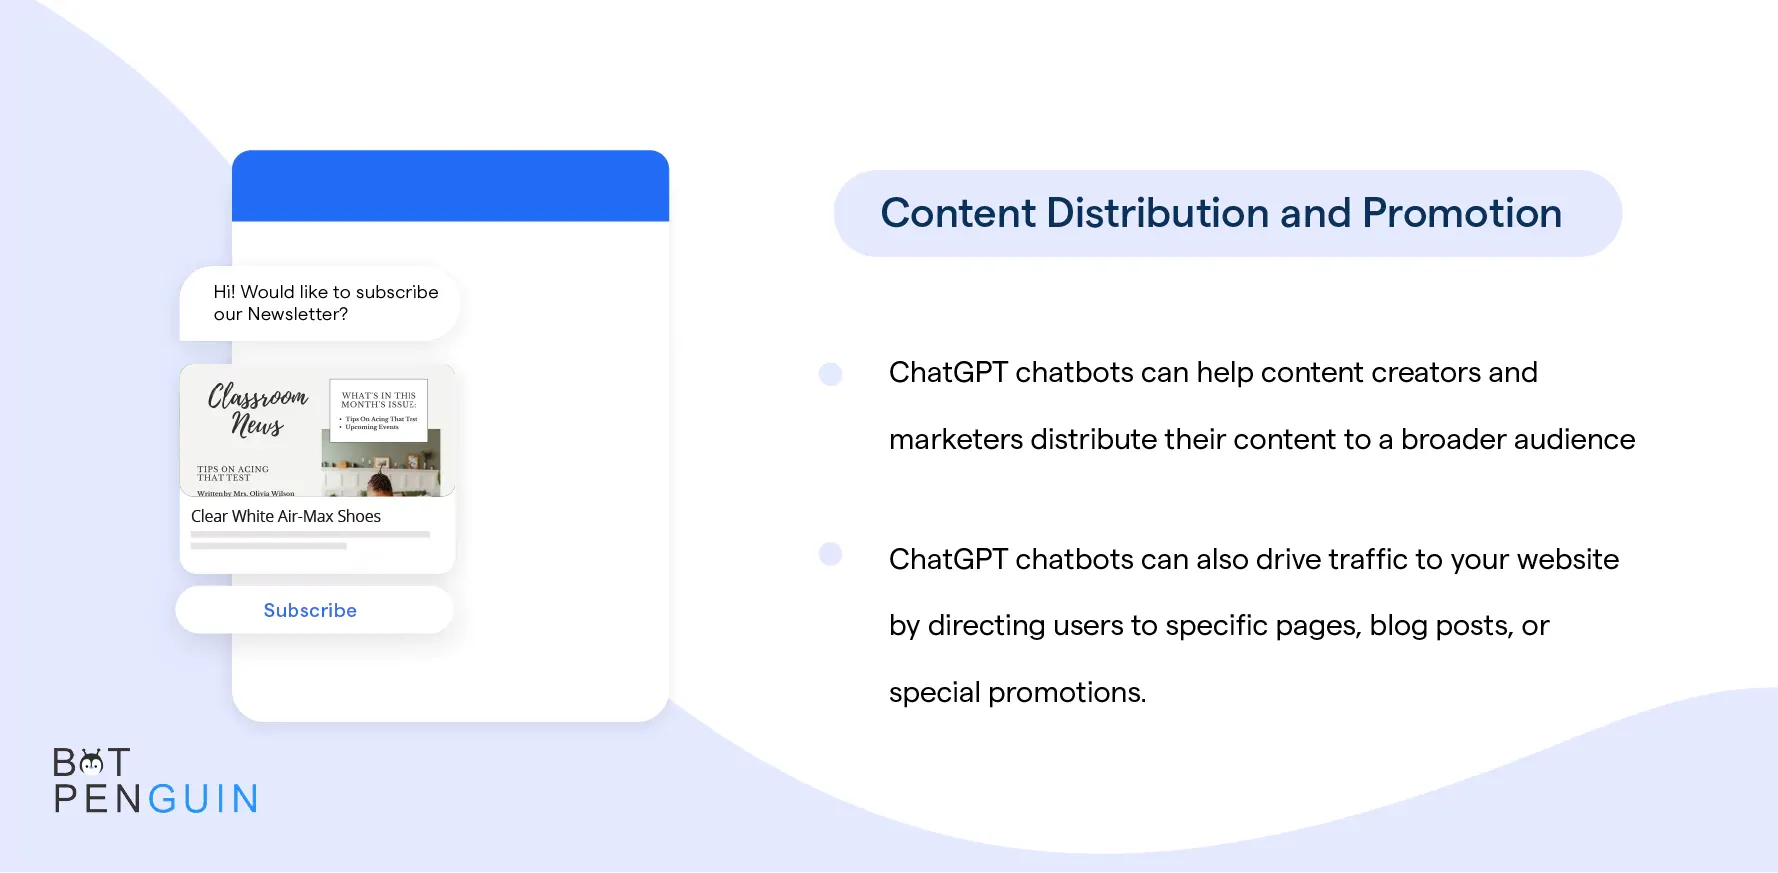 Content Distribution and Promotion.